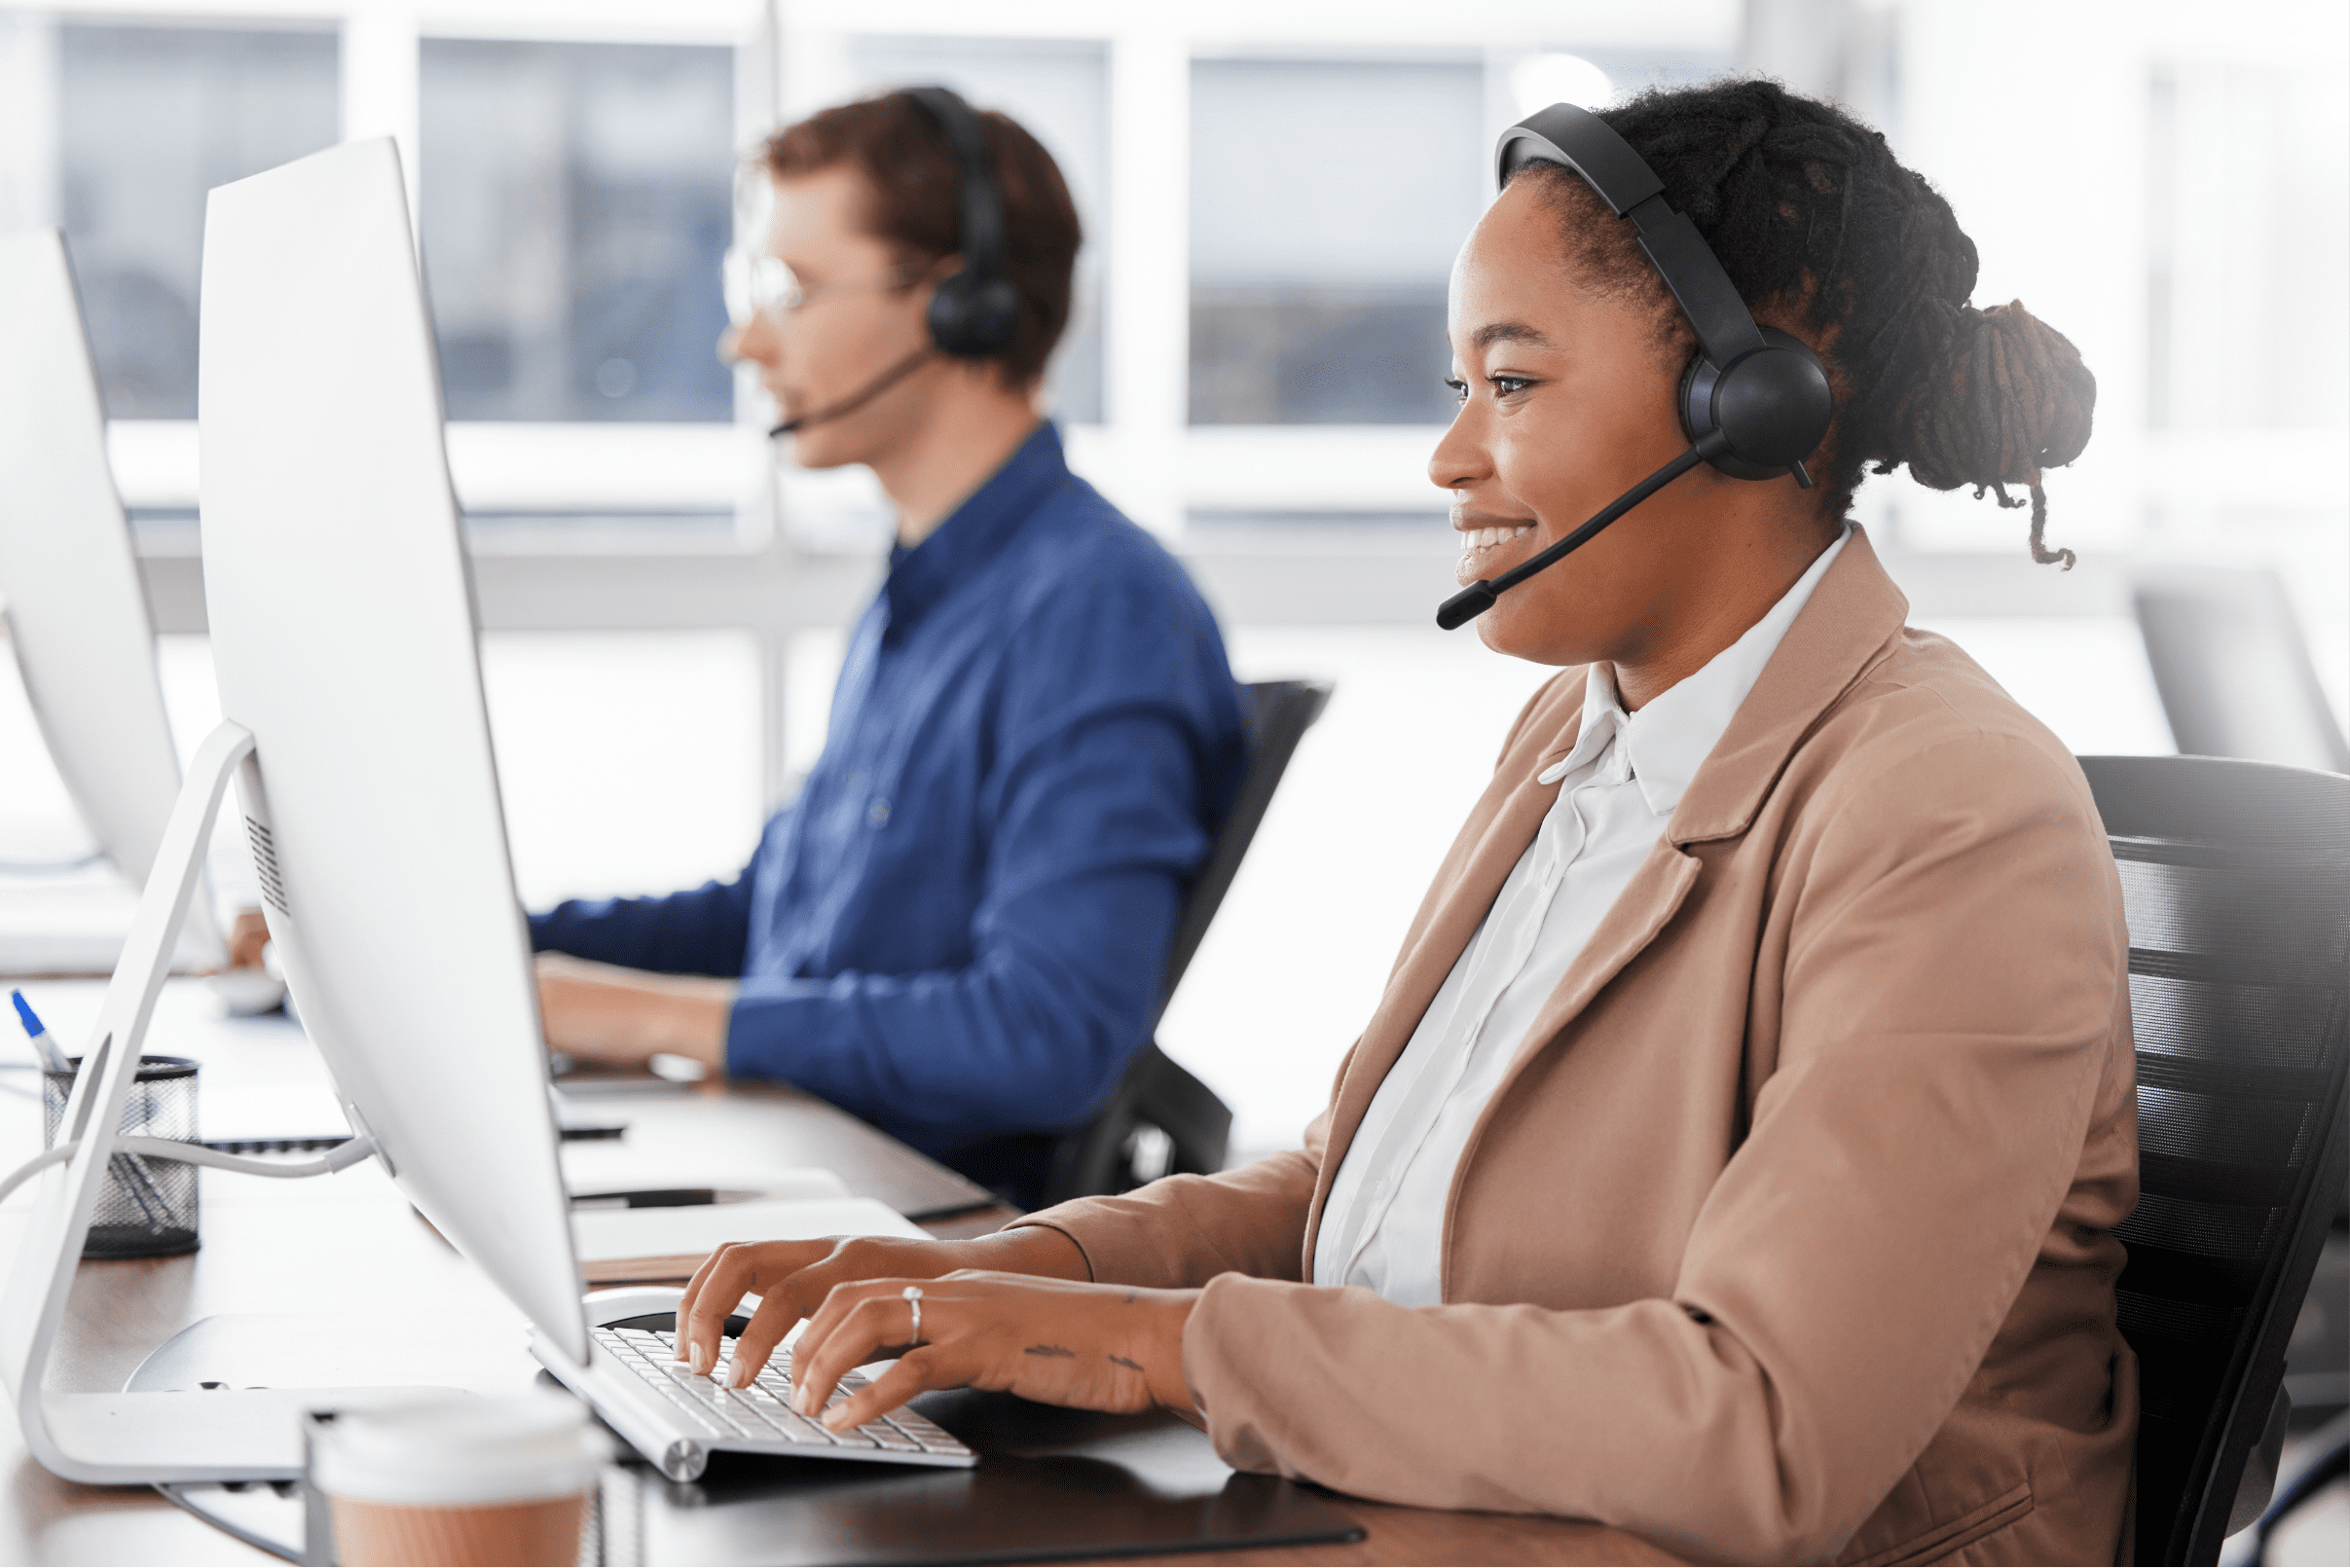 Black Woman Call Center And Typing On Computer S 2023 11 27 05 33 39 Utc